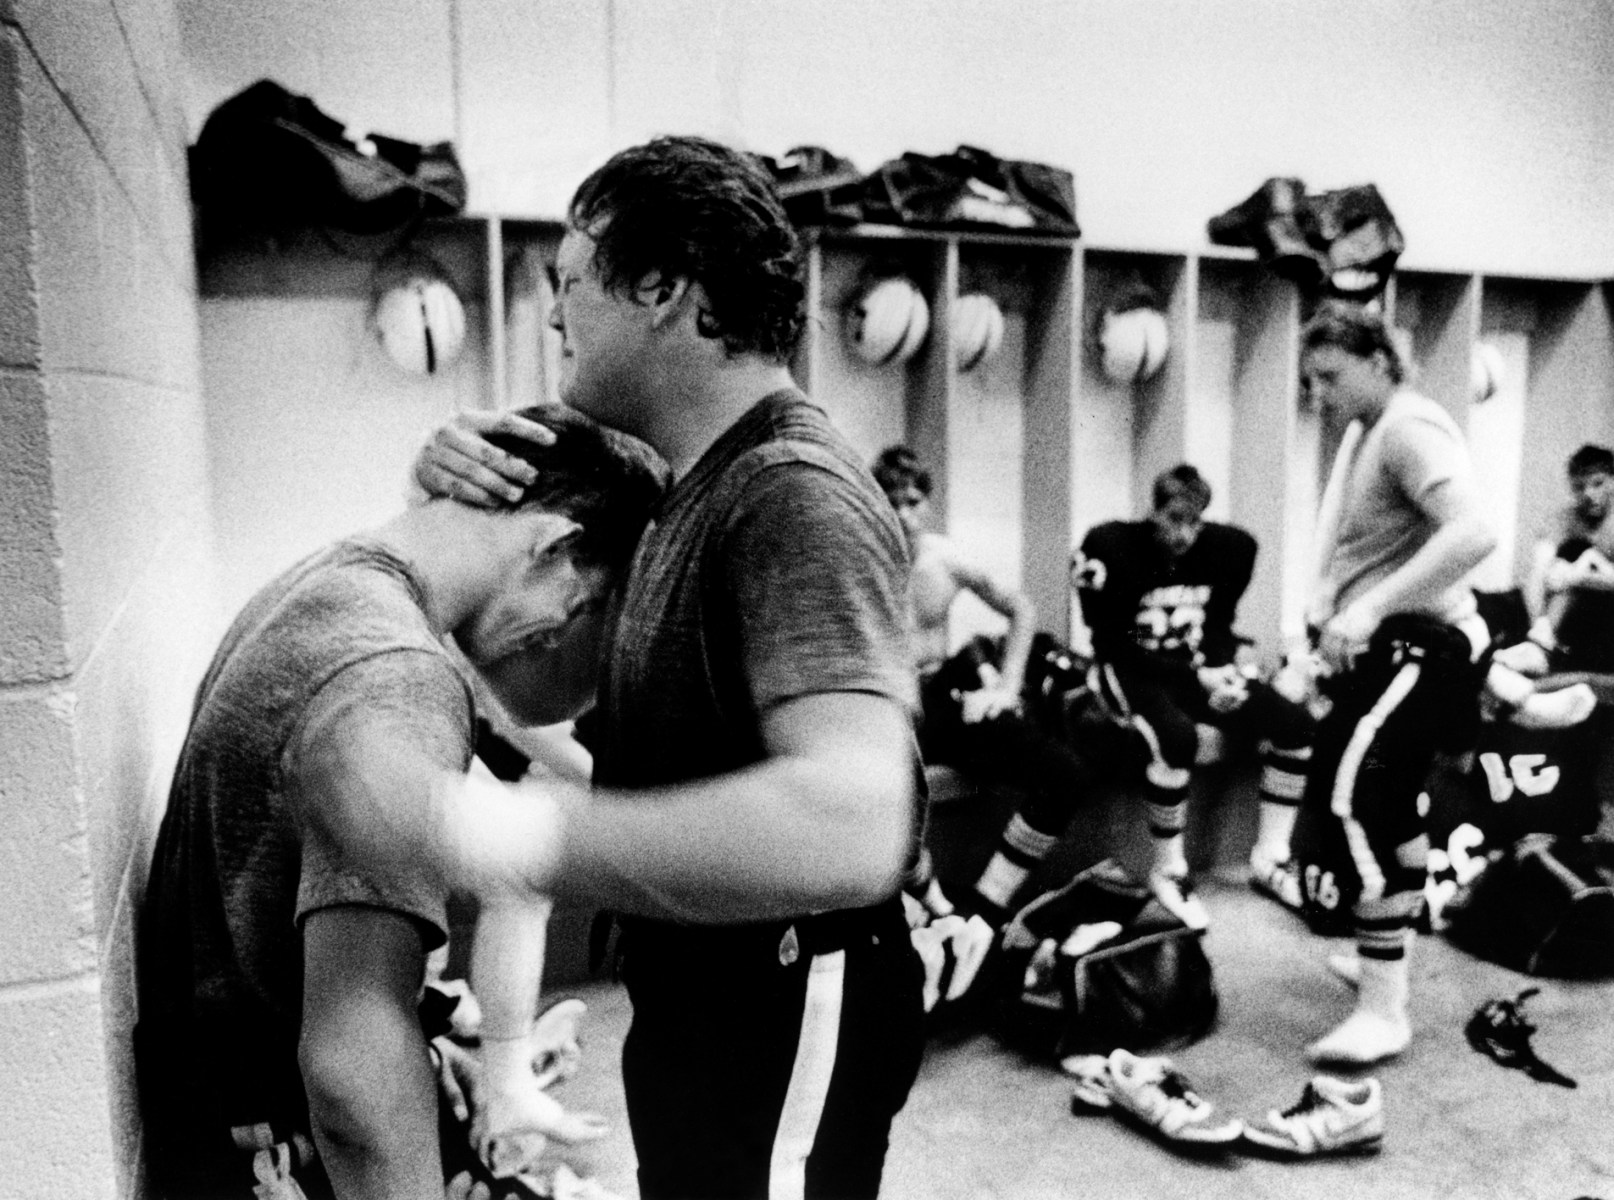 Jerrod McDougal embraces Greg Sweatt and punches the wall in the locker room following the loss to Midland Lee.<br><br>“Jerrod was smashing the wall and crying after the loss,” Clark says. “He was very emotional and really one of my favorite players. I just always liked him. He wasn't the most talented player, but he played with a lot of heart. You have to realize that it was a national program in a lot of ways. There was a lot of pressure on these kids. The town depended on them, the school depended on them. It's kind of where they got a positive sense of their identity.”